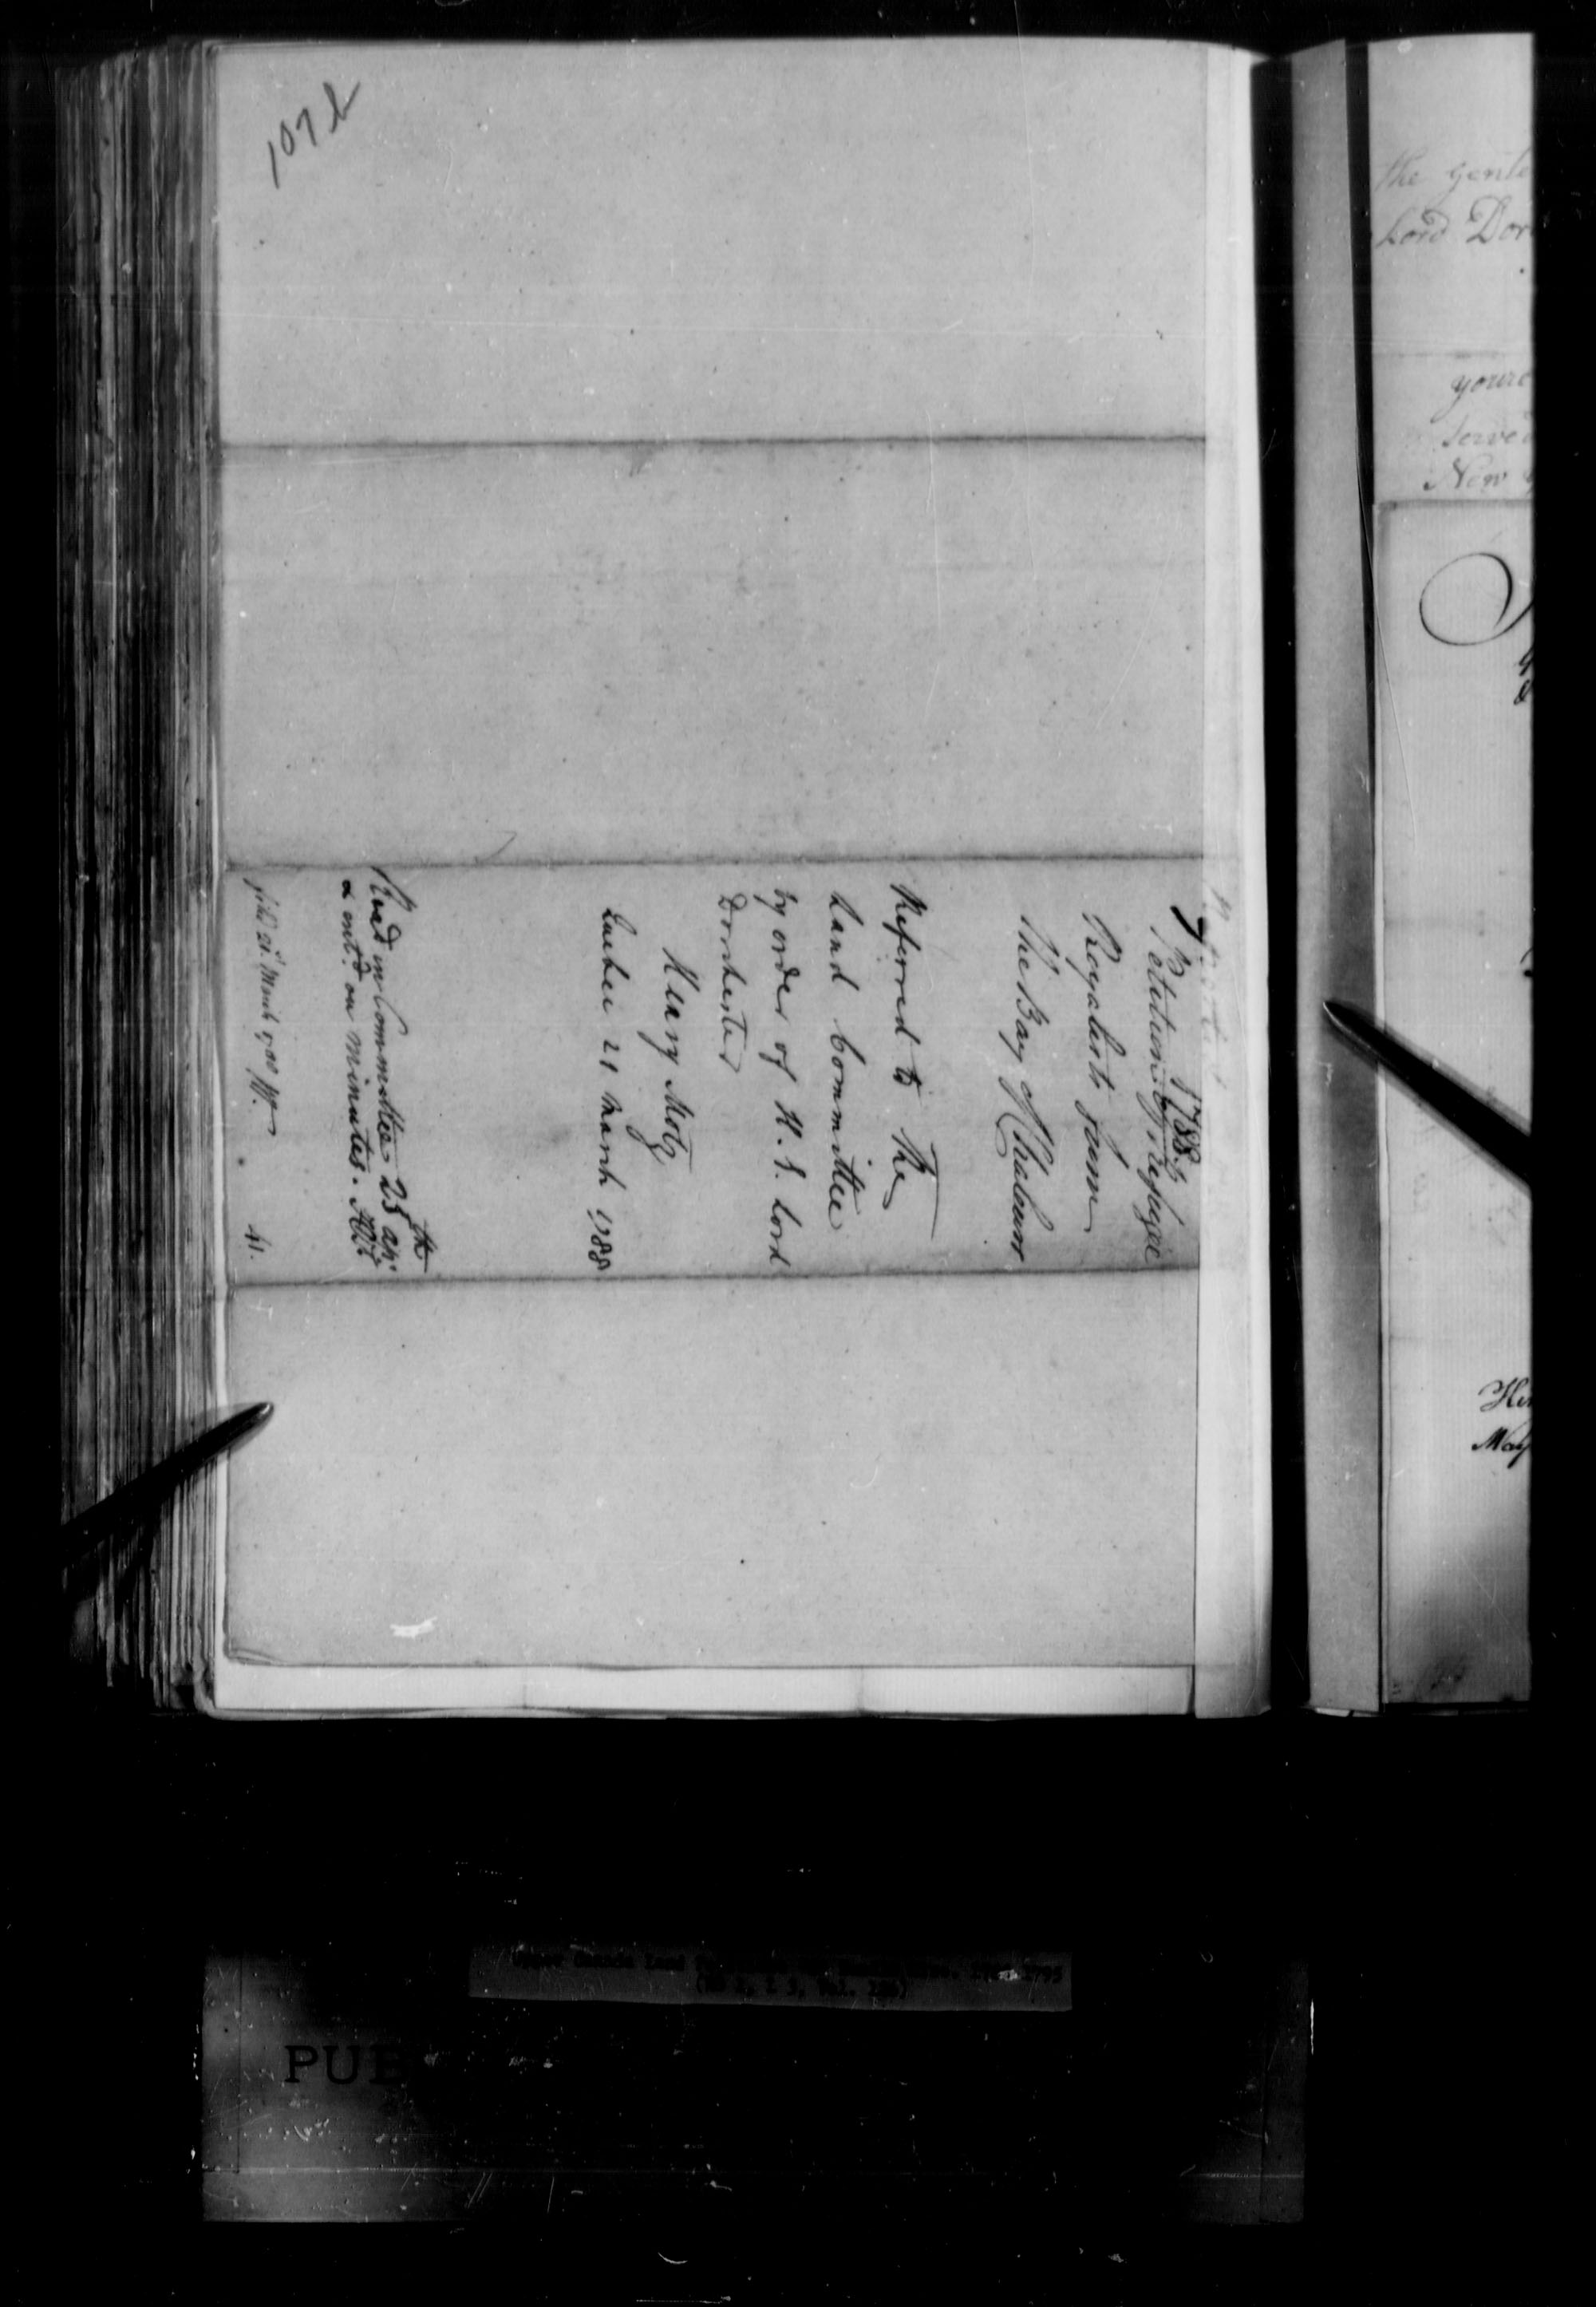 Title: Upper Canada Land Petitions (1763-1865) - Mikan Number: 205131 - Microform: c-1731